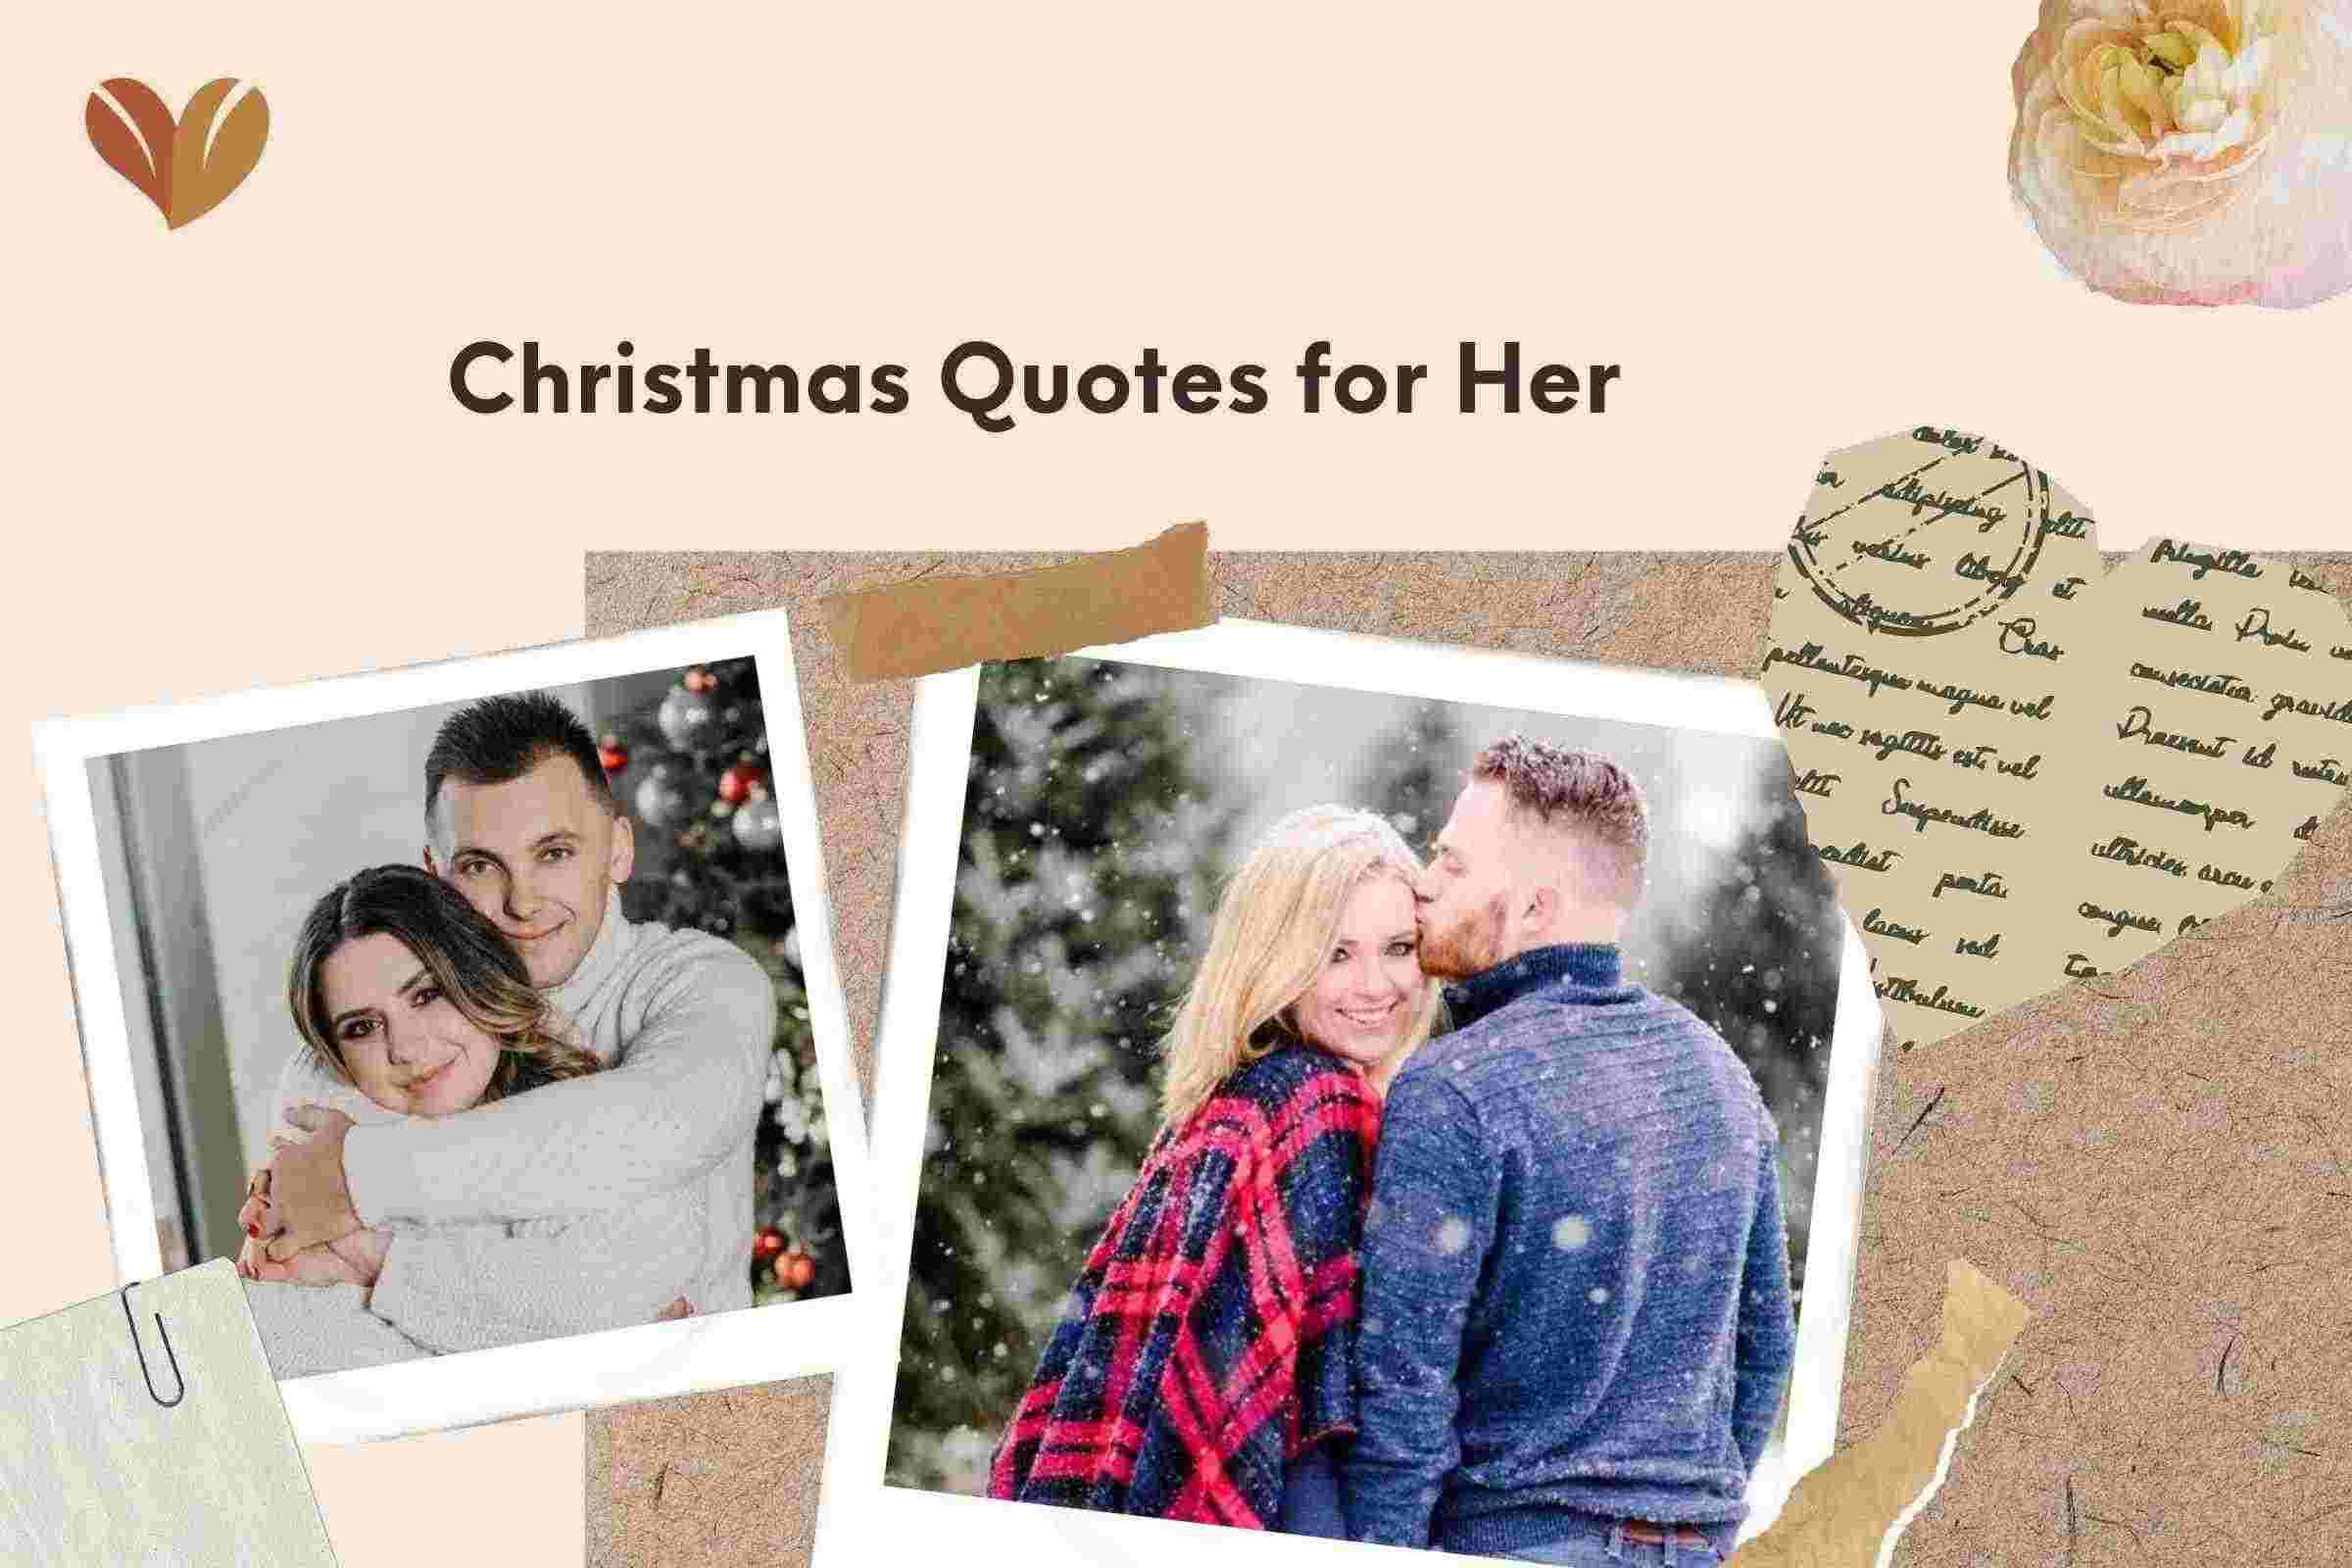 Christmas Quotes for Her